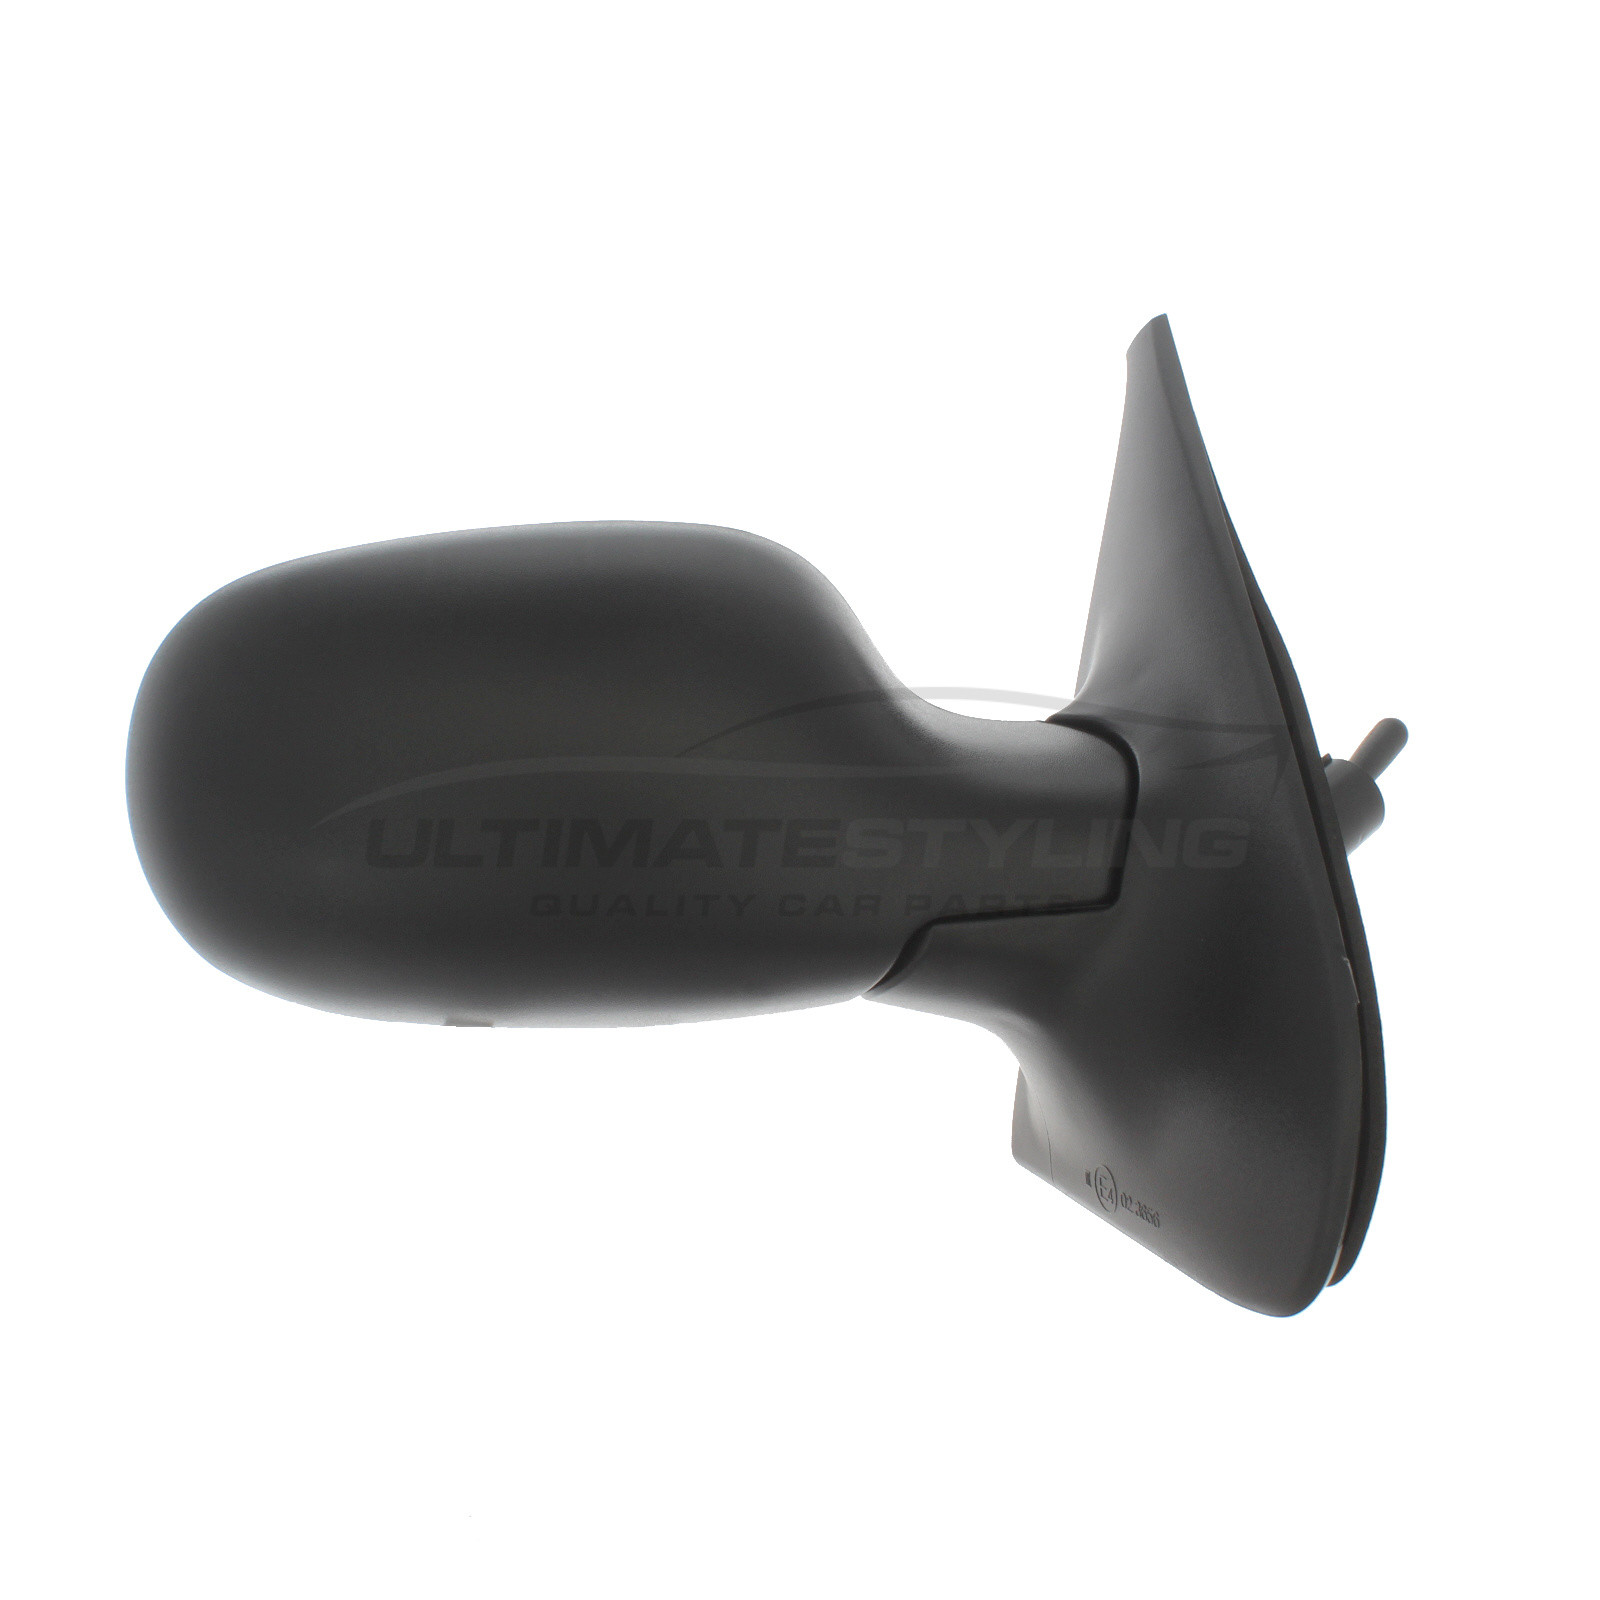 Renault Clio Wing Mirror / Door Mirror - Drivers Side (RH) - Cable adjustment - Non-Heated Glass - Black